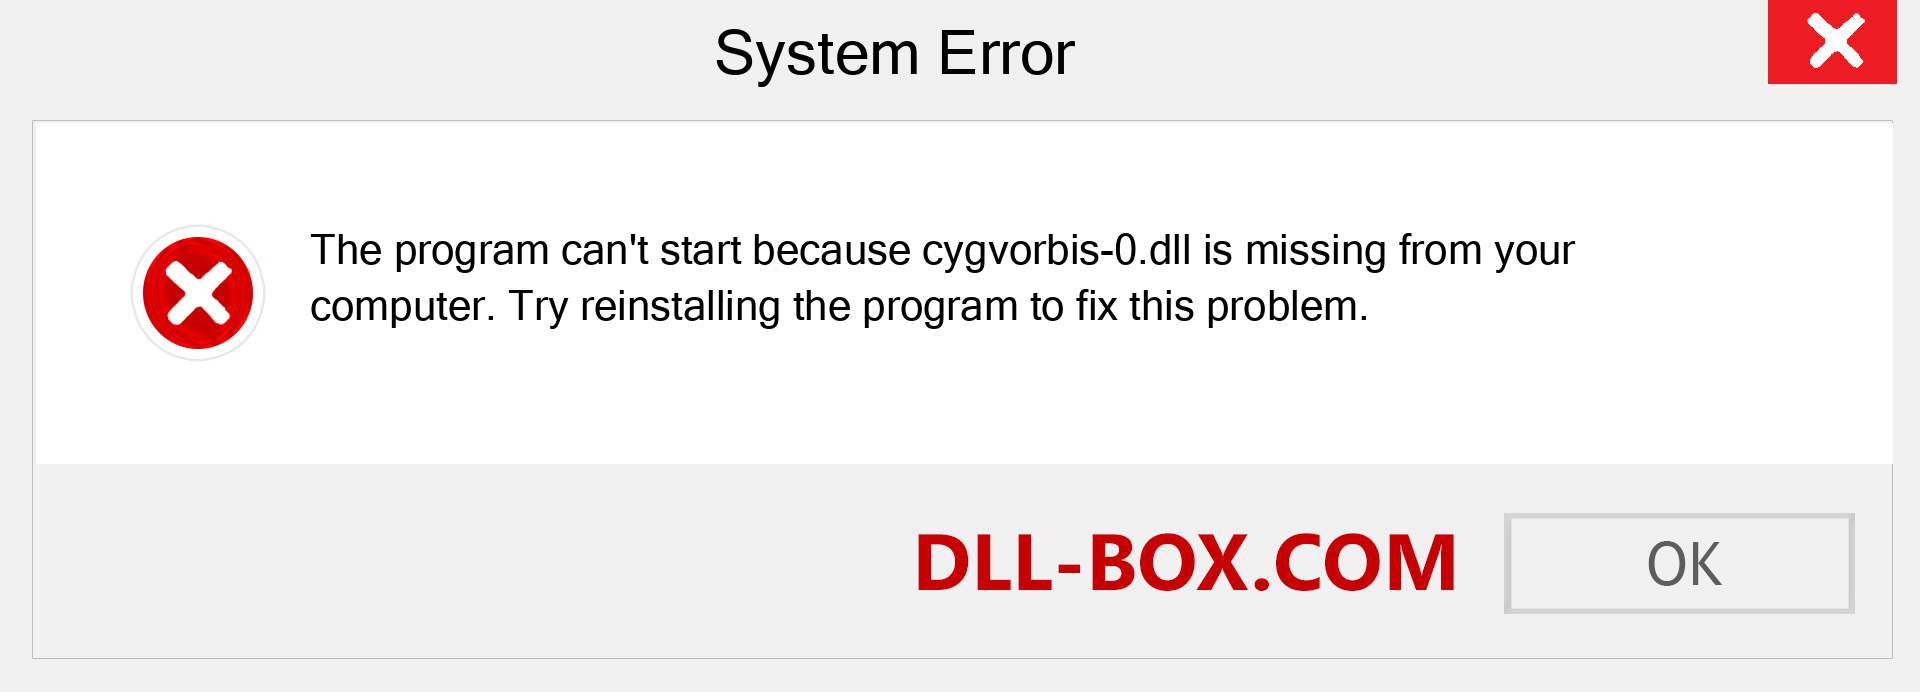  cygvorbis-0.dll file is missing?. Download for Windows 7, 8, 10 - Fix  cygvorbis-0 dll Missing Error on Windows, photos, images